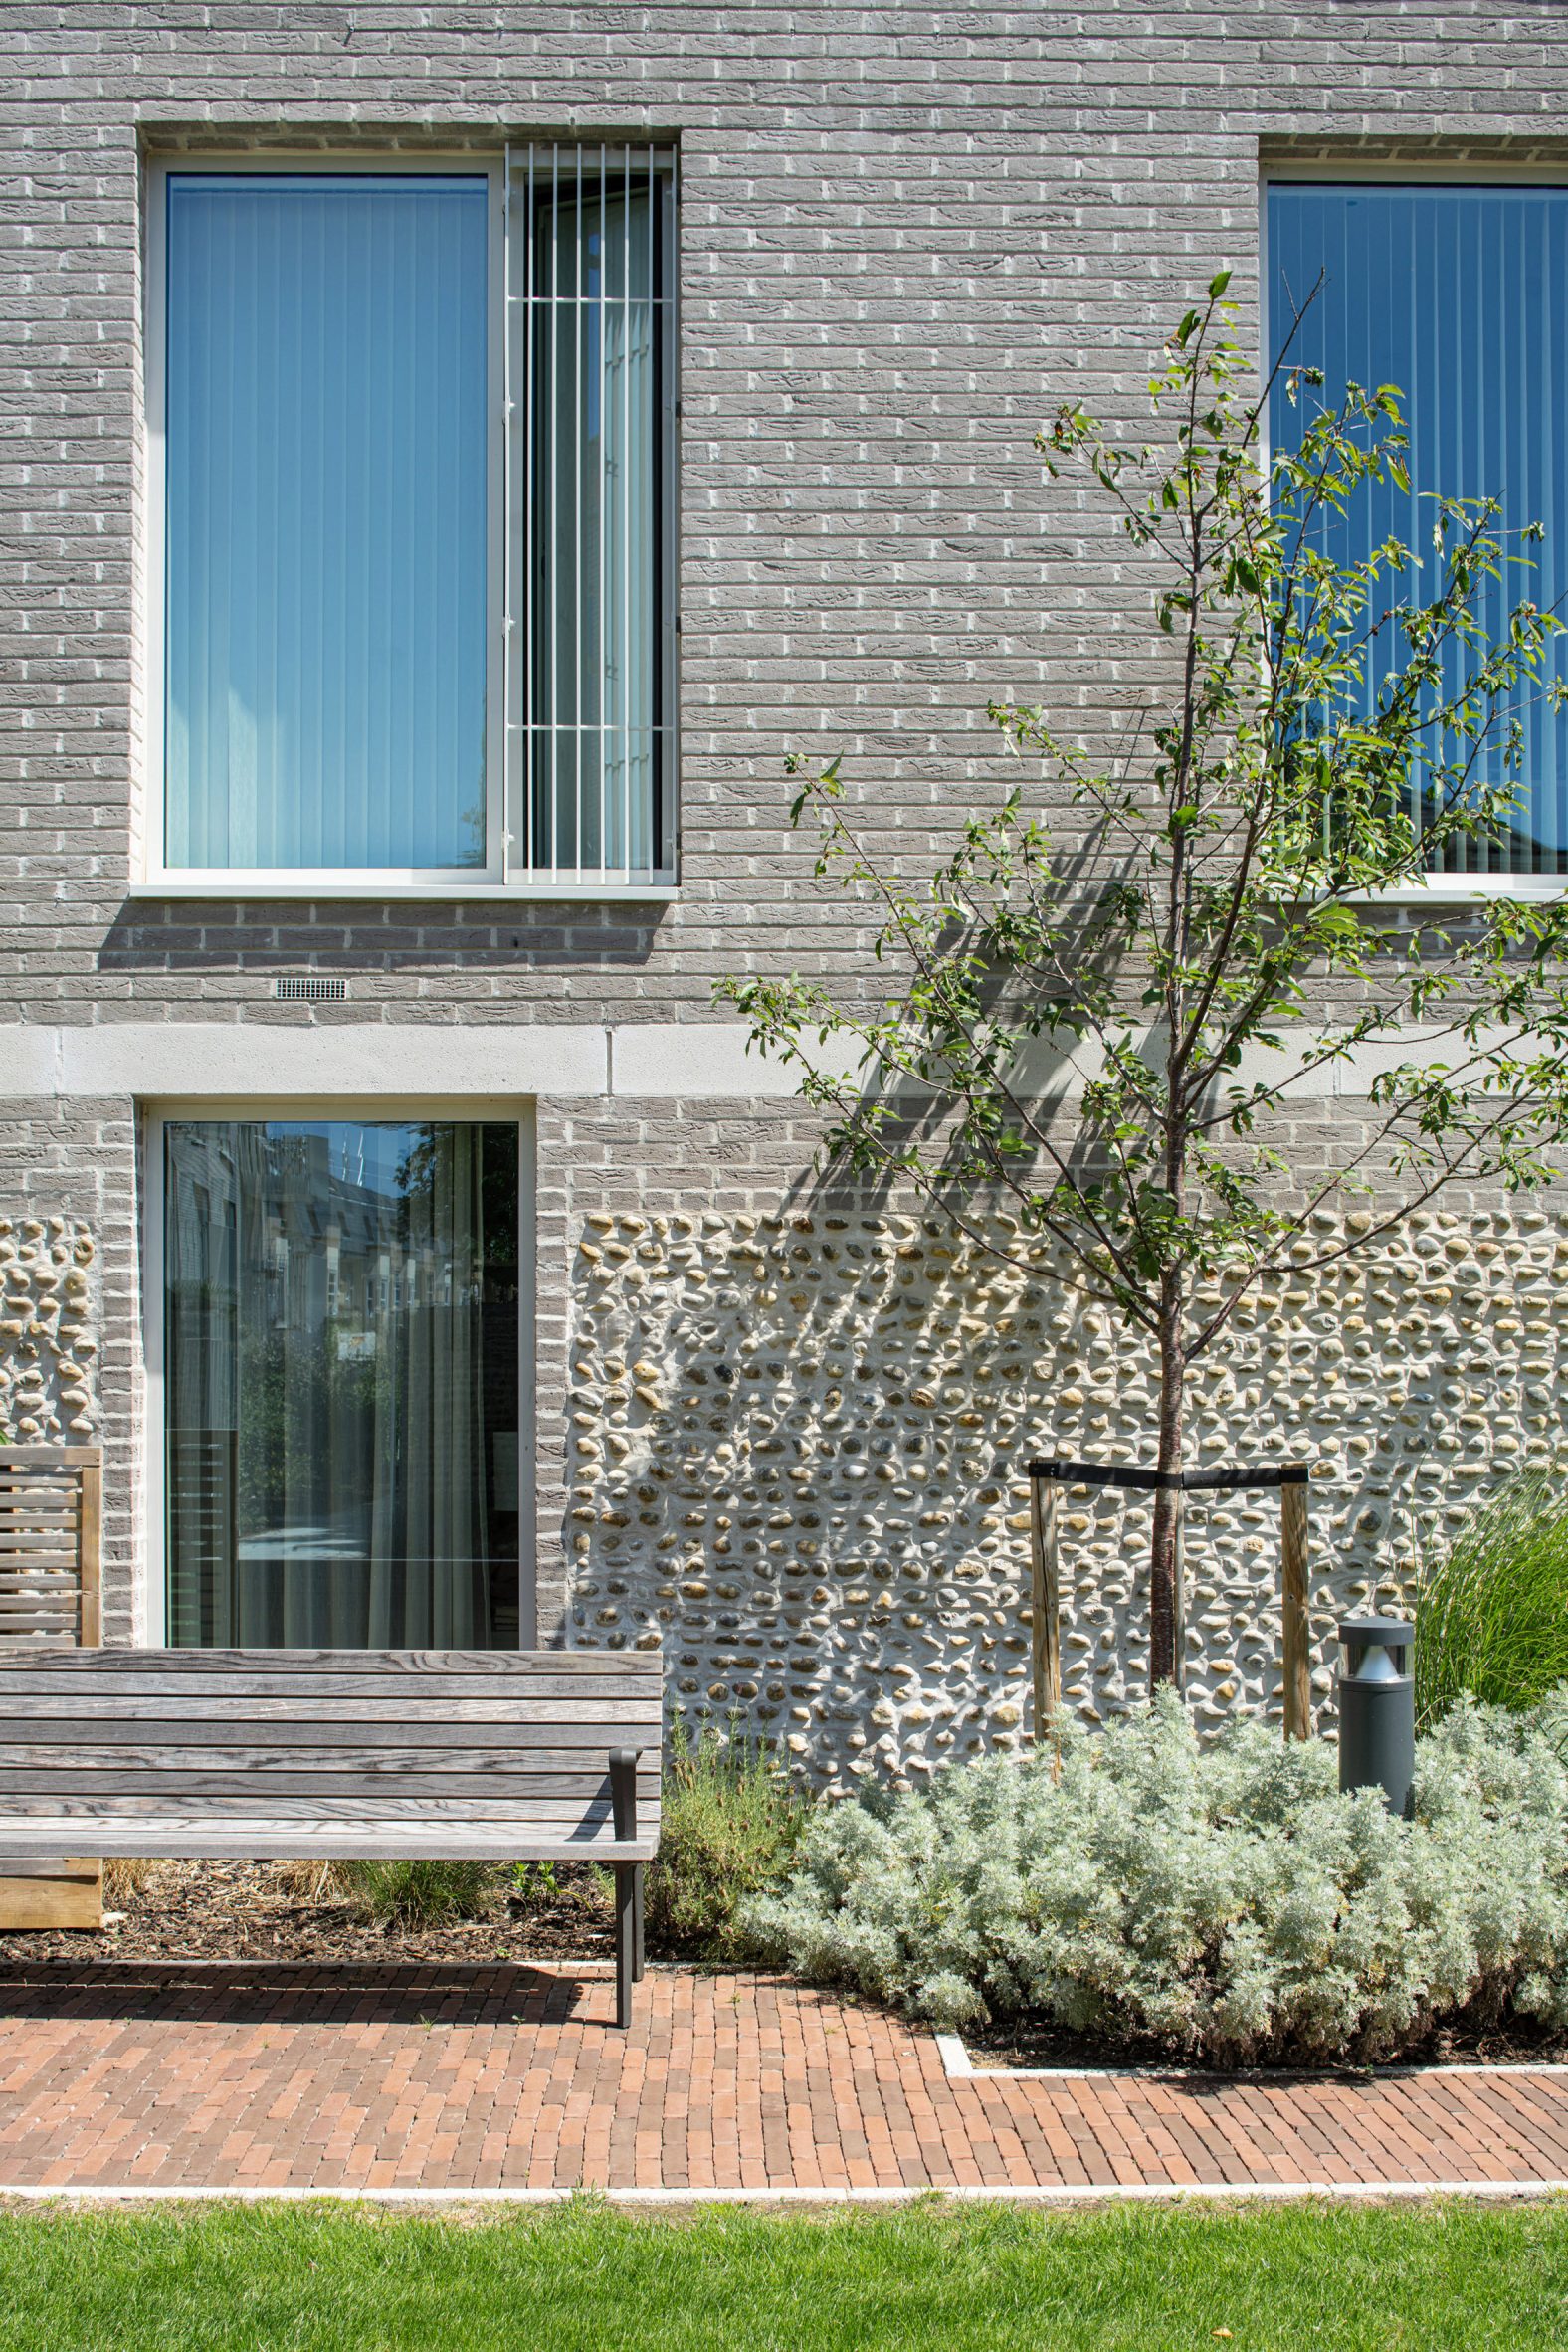 Brick and flint walls at Cobham Bowers retirement housing in Surrey by Coffey Architects